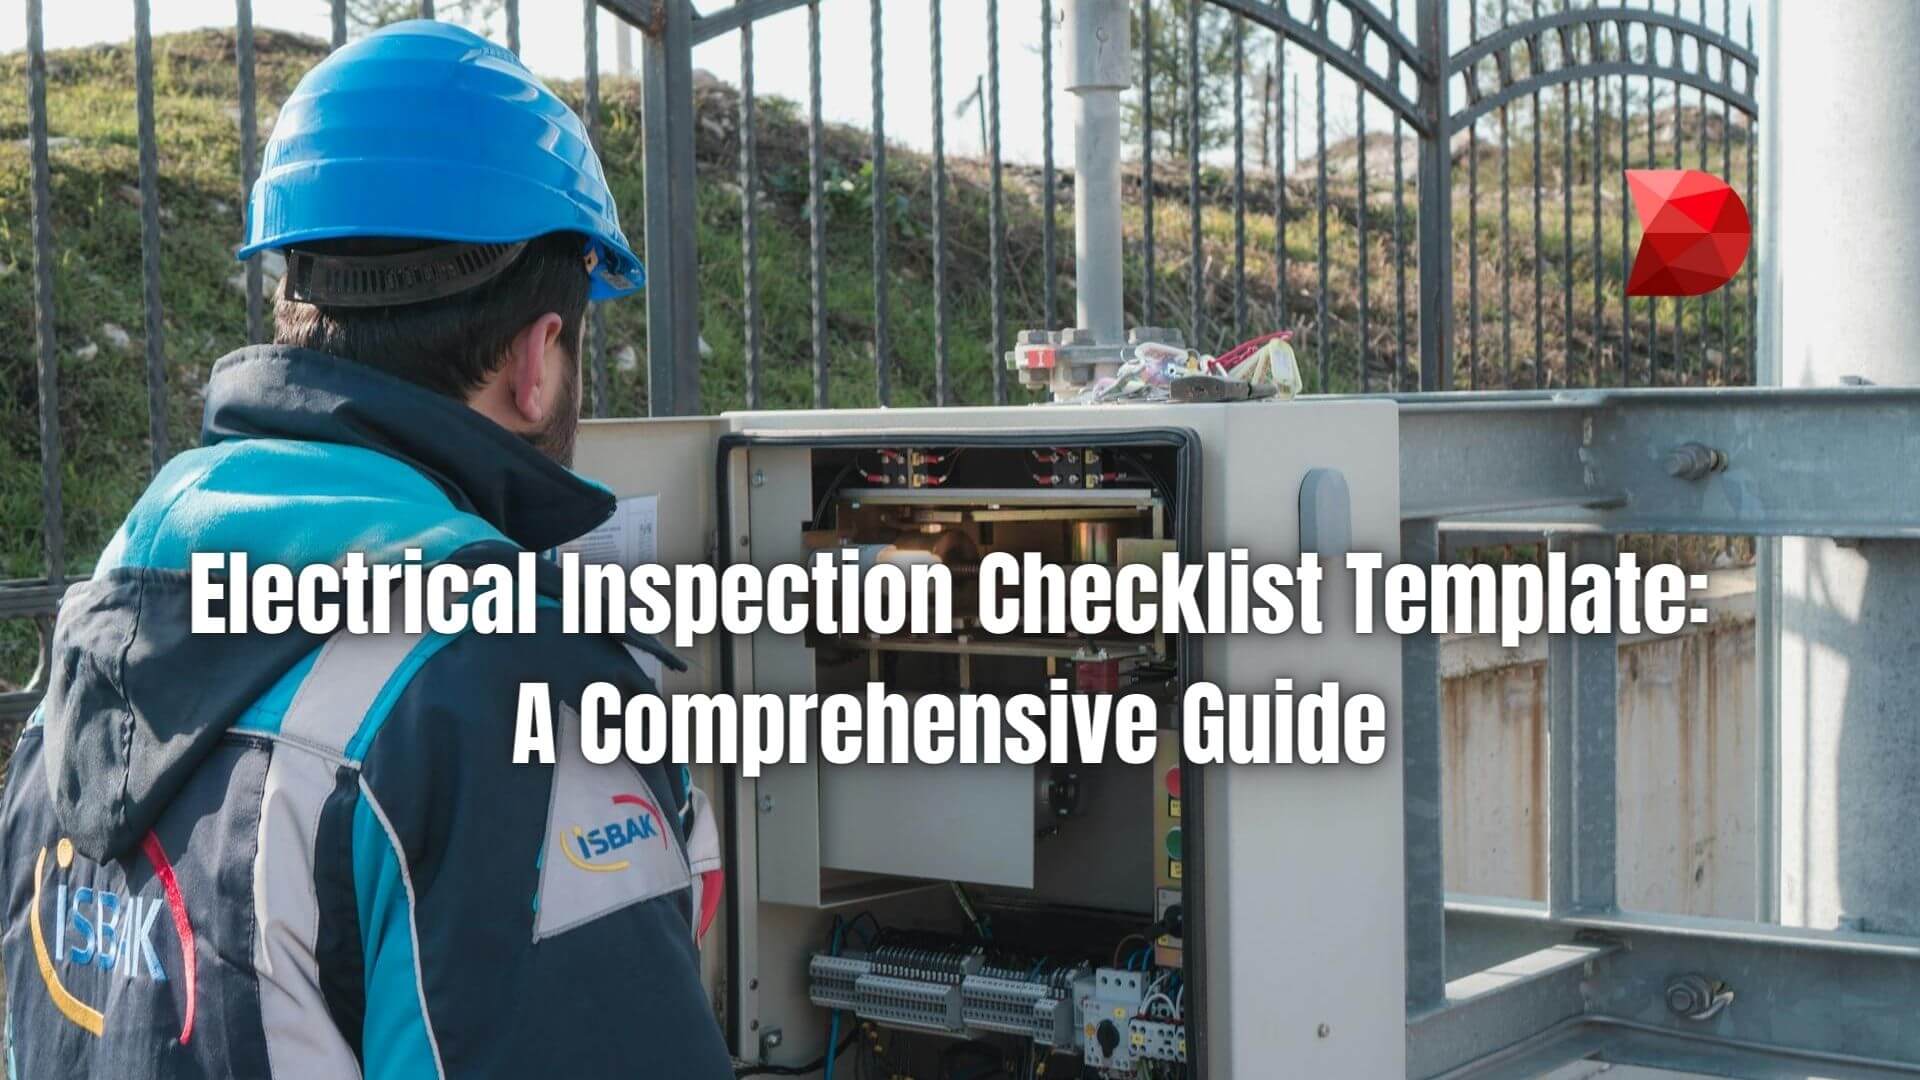 Enhance safety standards efficiently! Discover the essential steps for creating an effective electrical inspection checklist template.